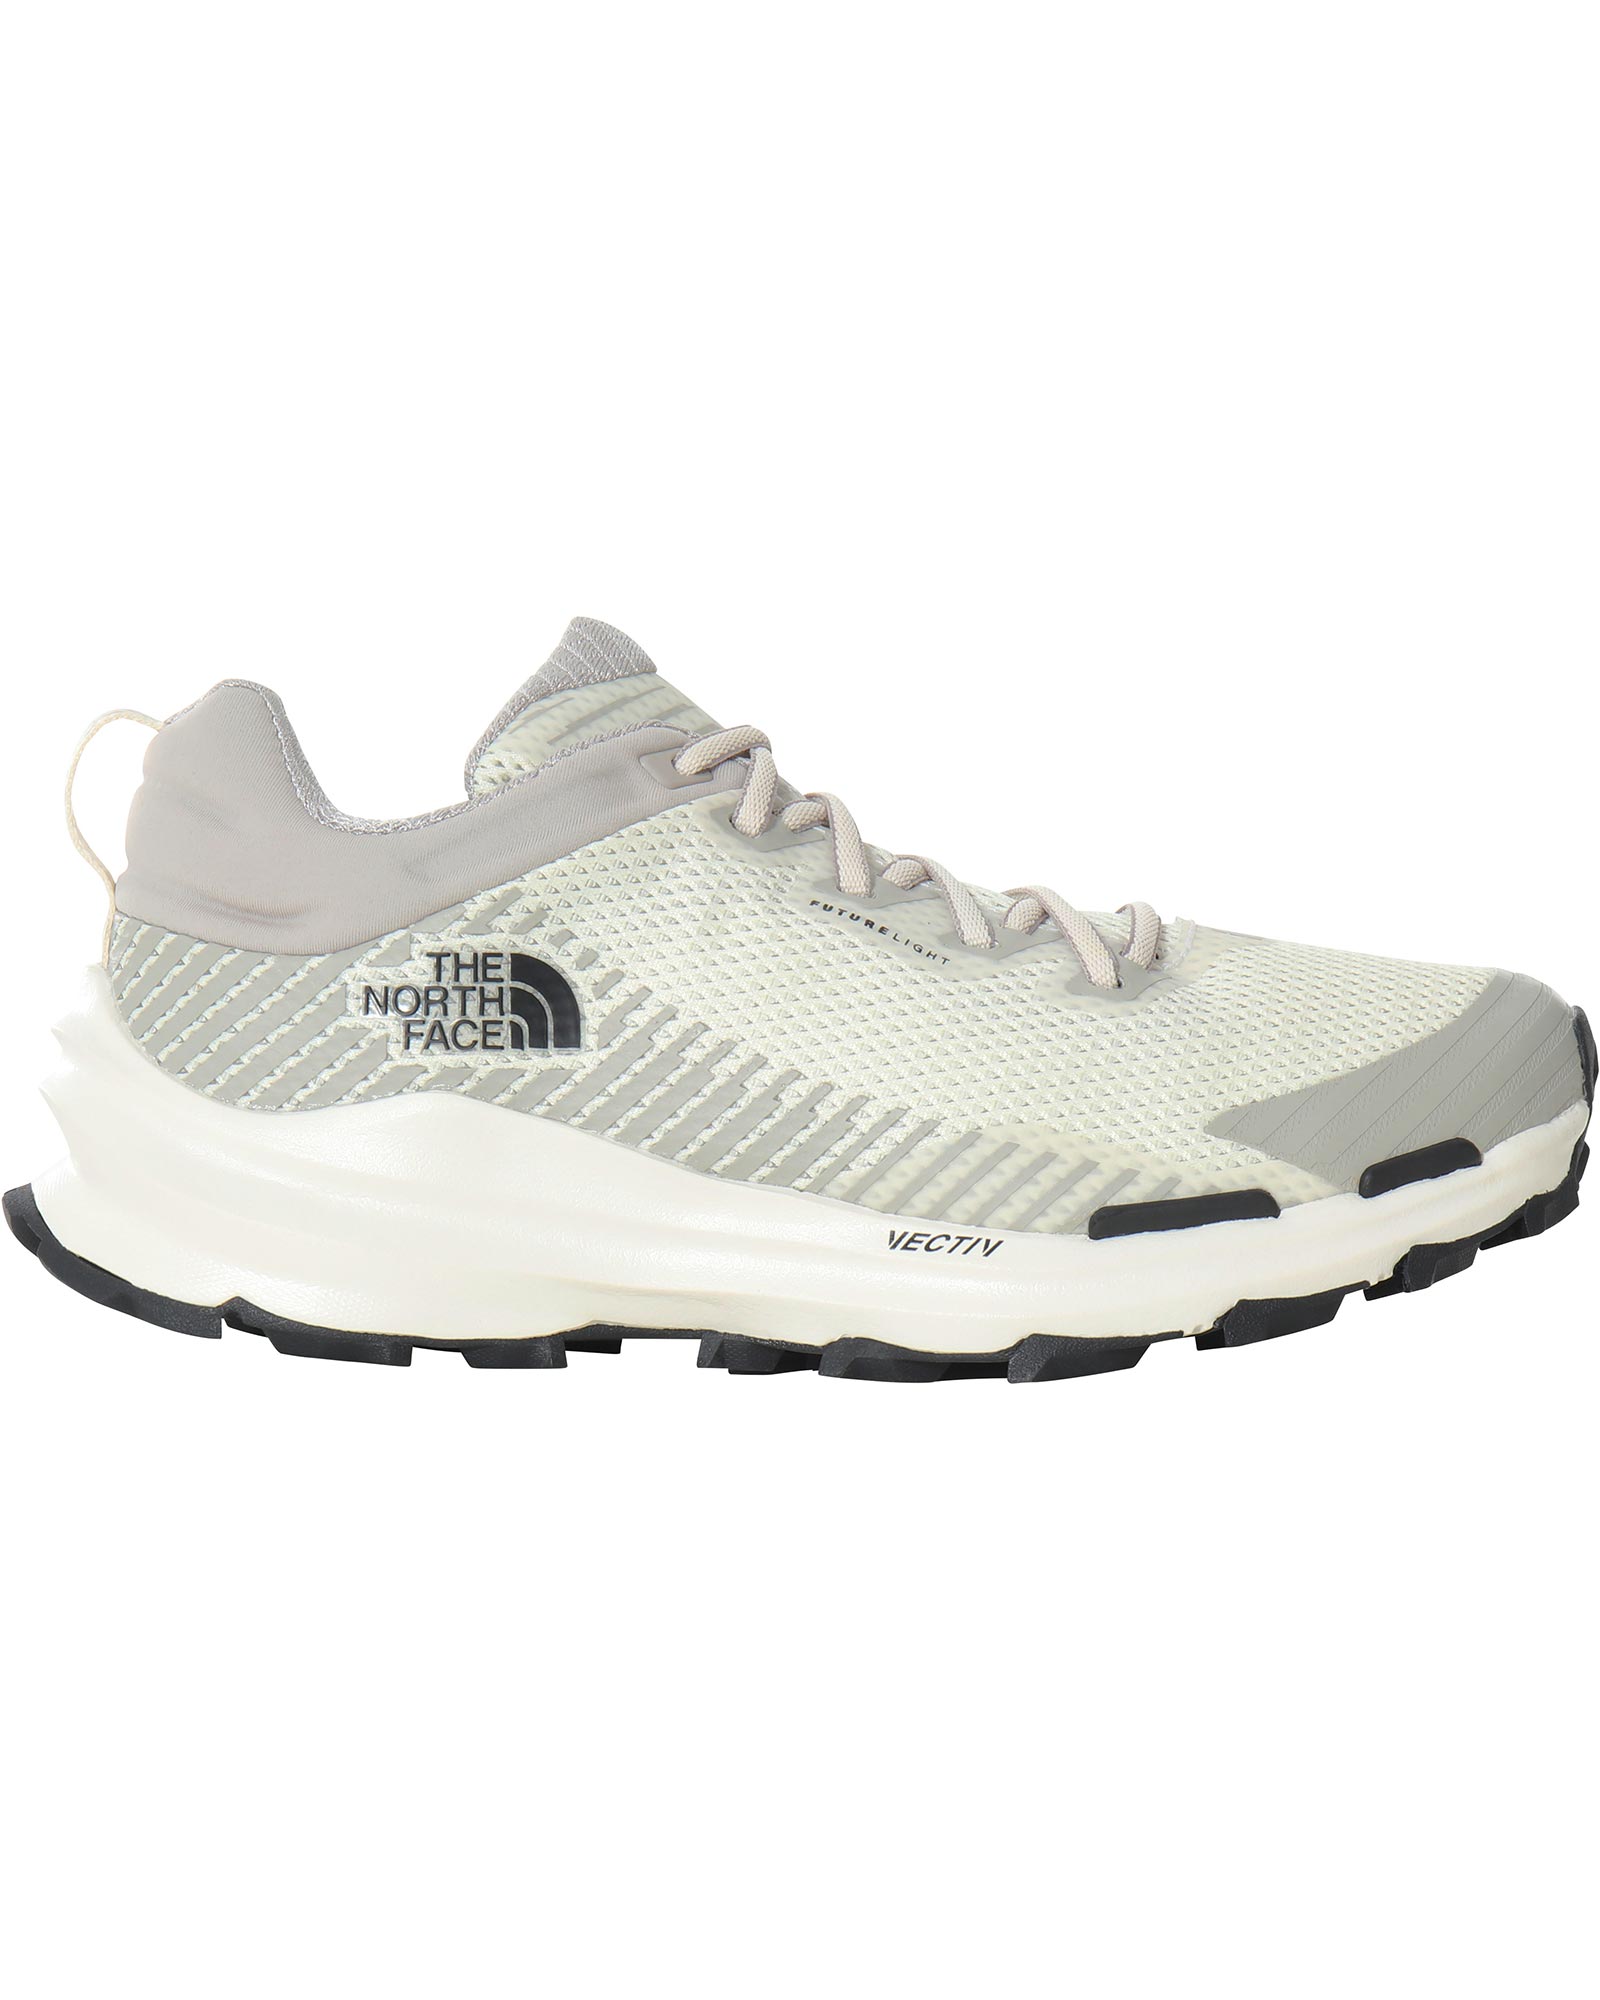 The North Face Women's Vectiv Fastpack FUTURELIGHT Shoes